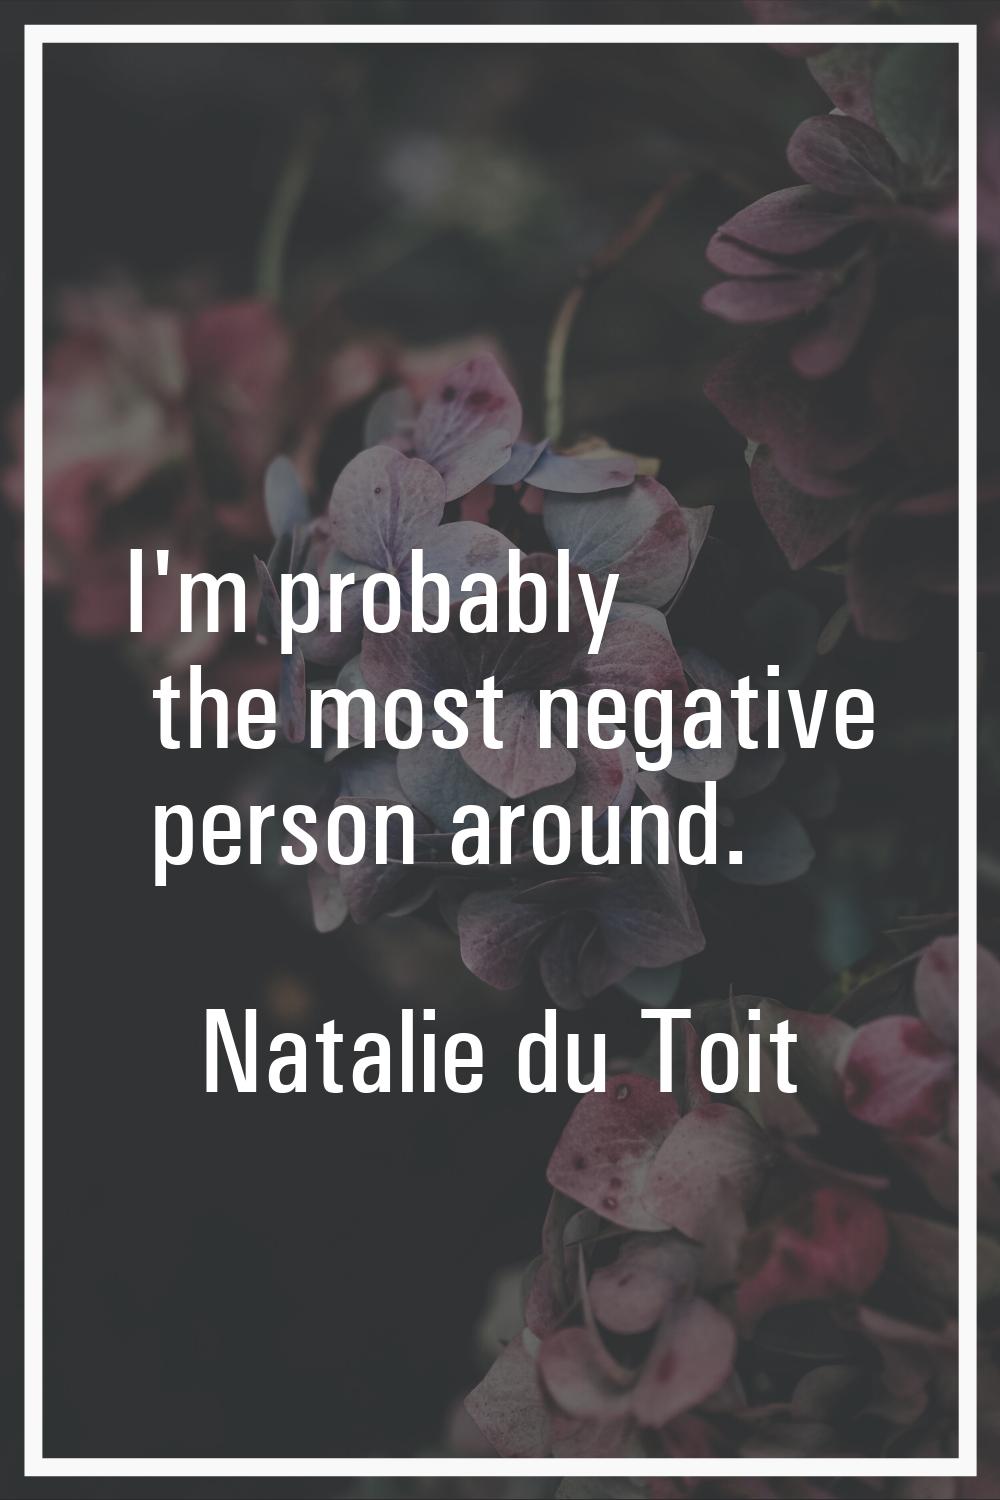 I'm probably the most negative person around.